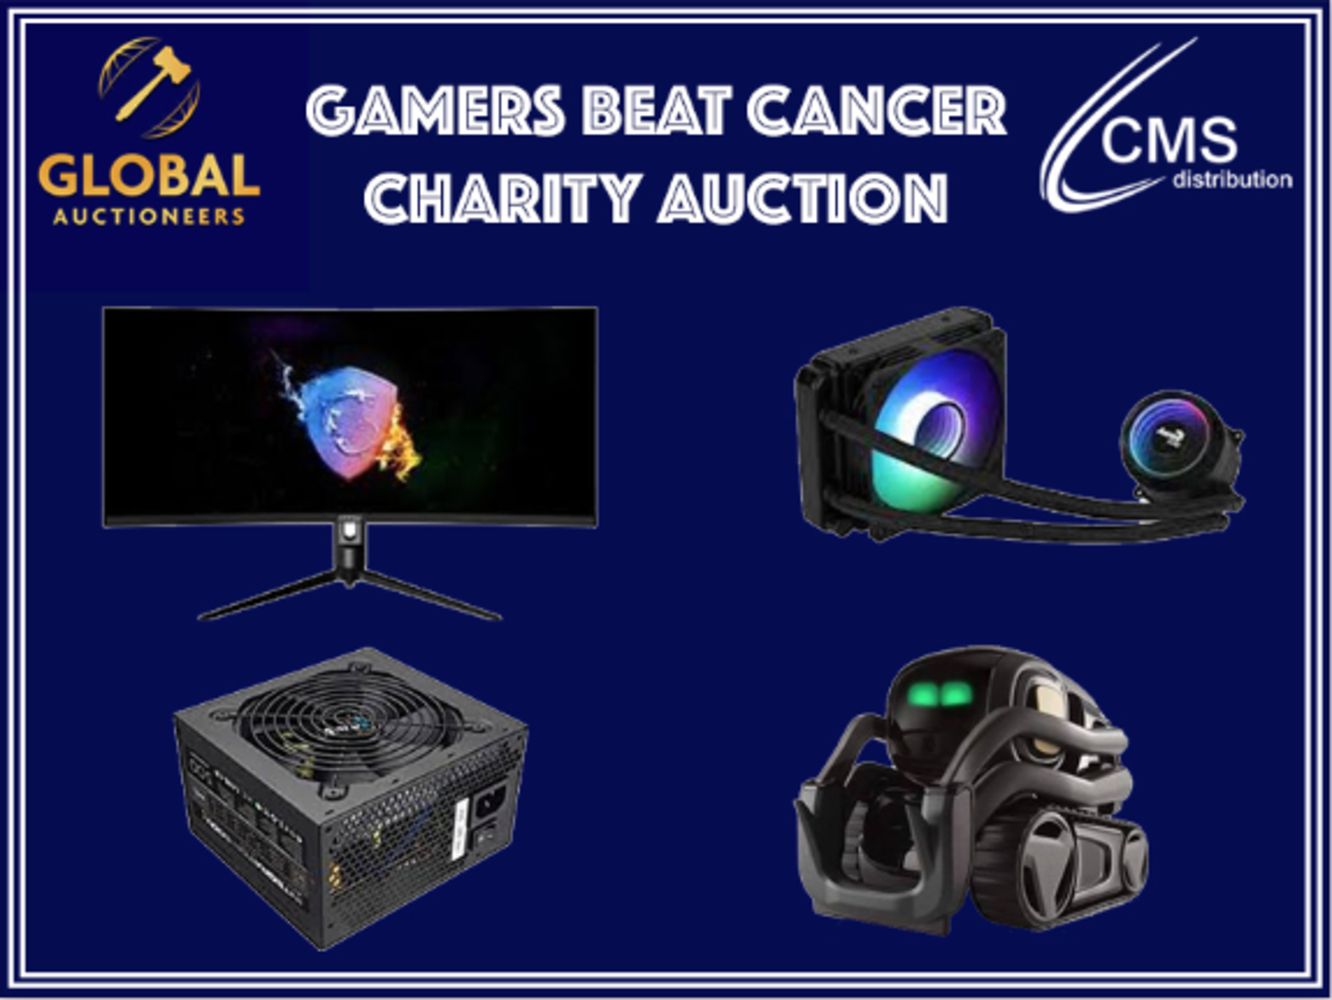 Gamers Beat Cancer - Charity Auction - 28th May 2021